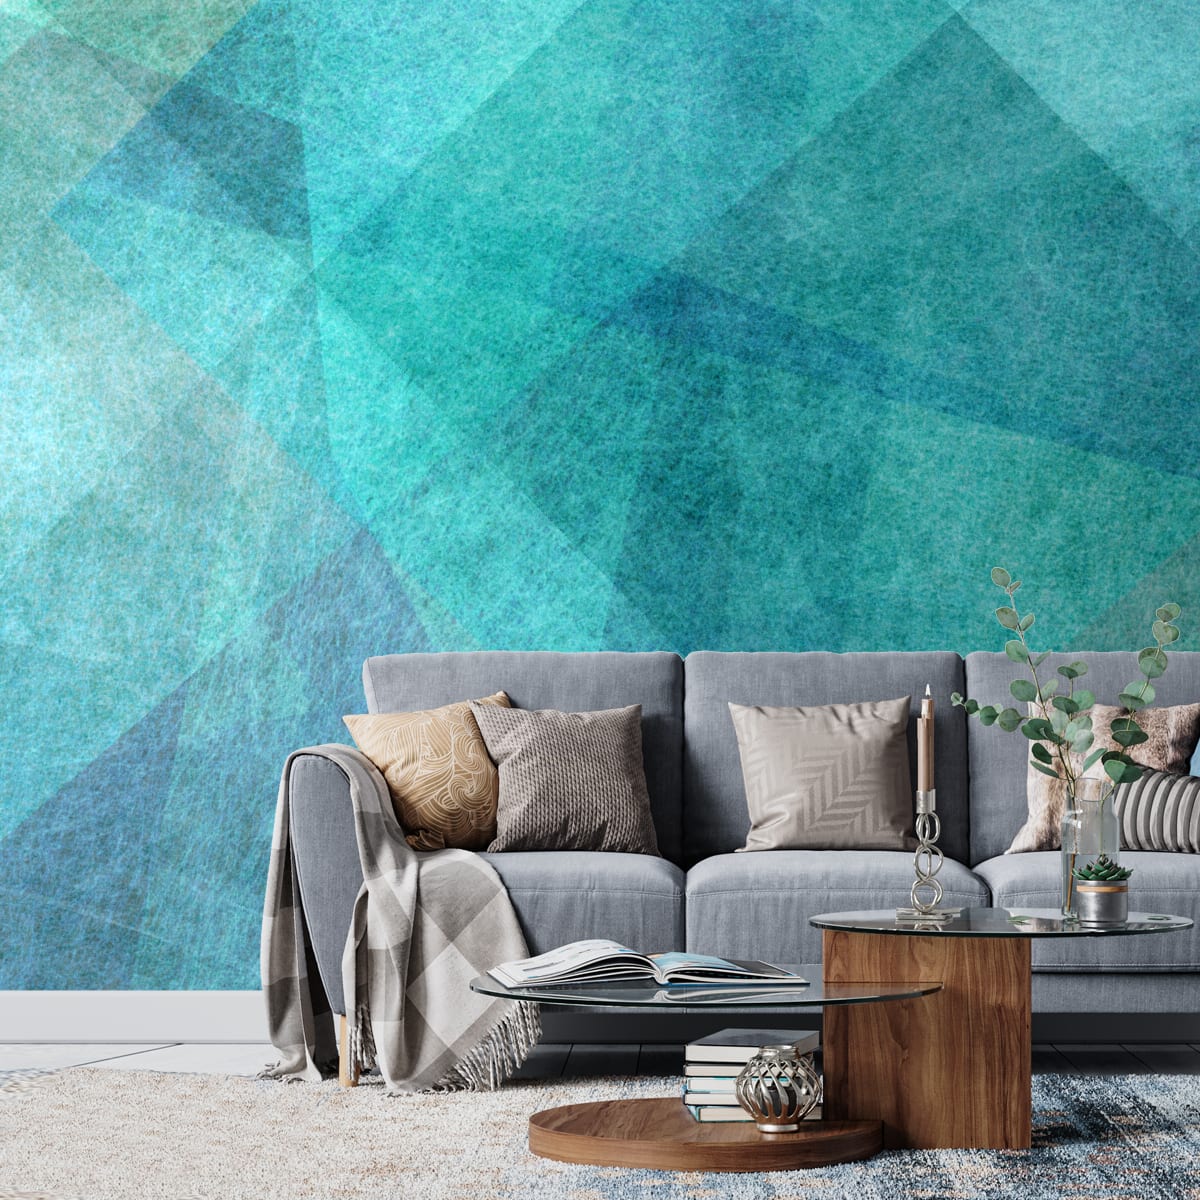 Green and Blue Geometric Shapes, Wallpaper for Walls, Customised